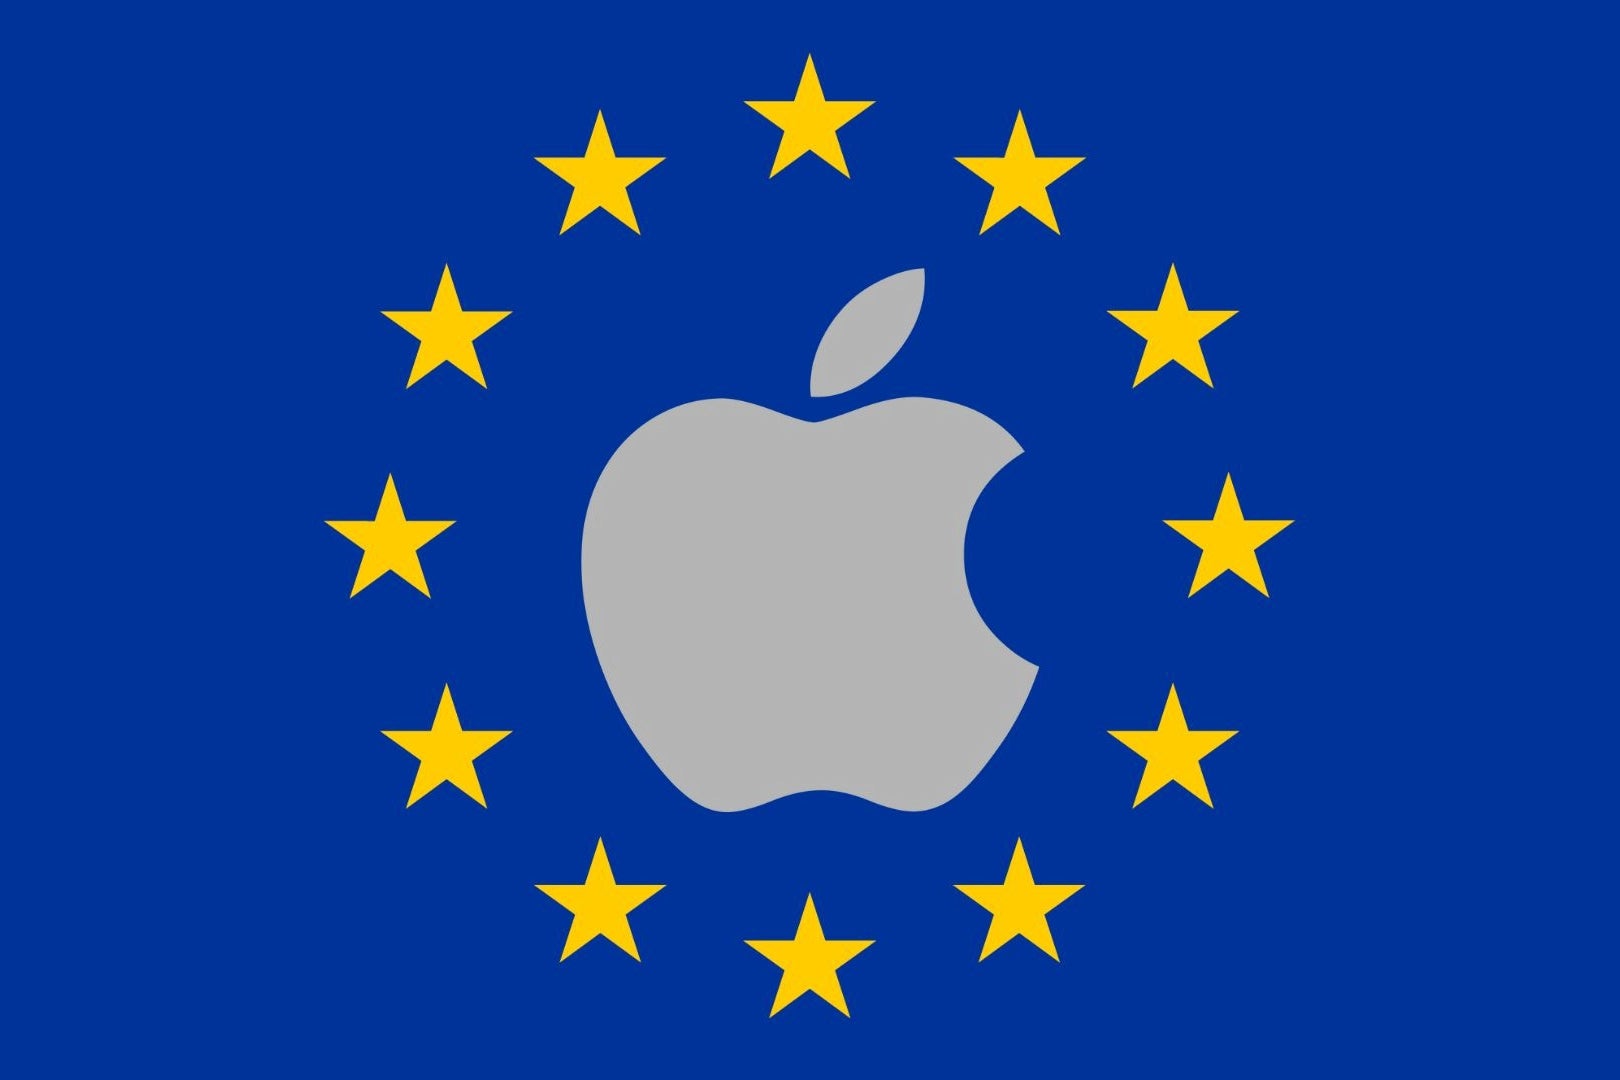 Lately, Apple has been pressured by the EU to open its ecosystem to competitors. - Hey Safari, are you listening? No? Really? Well, if Apple says so